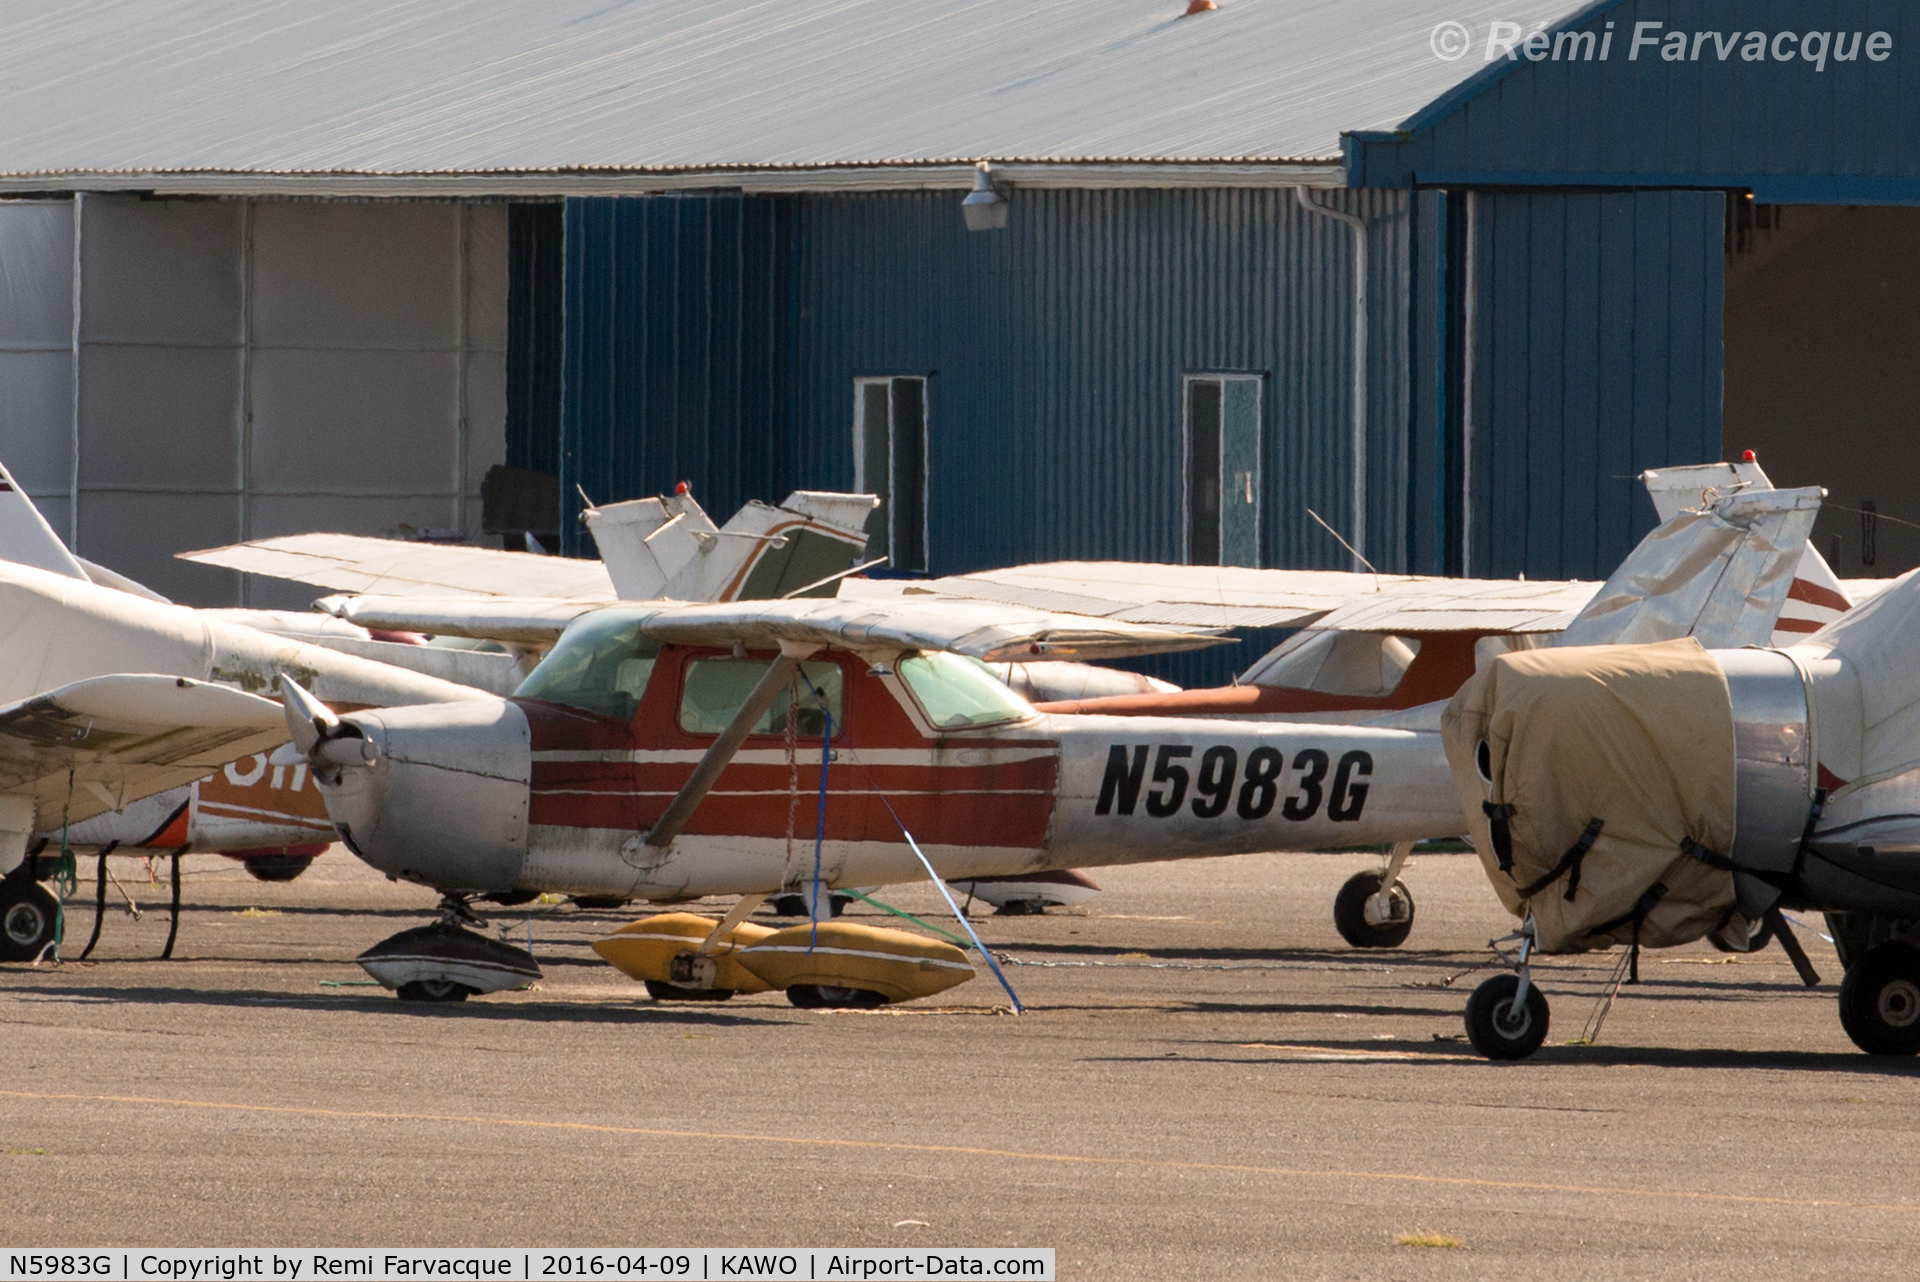 N5983G, 1969 Cessna 150K C/N 15071483, Parked south of main terminal building